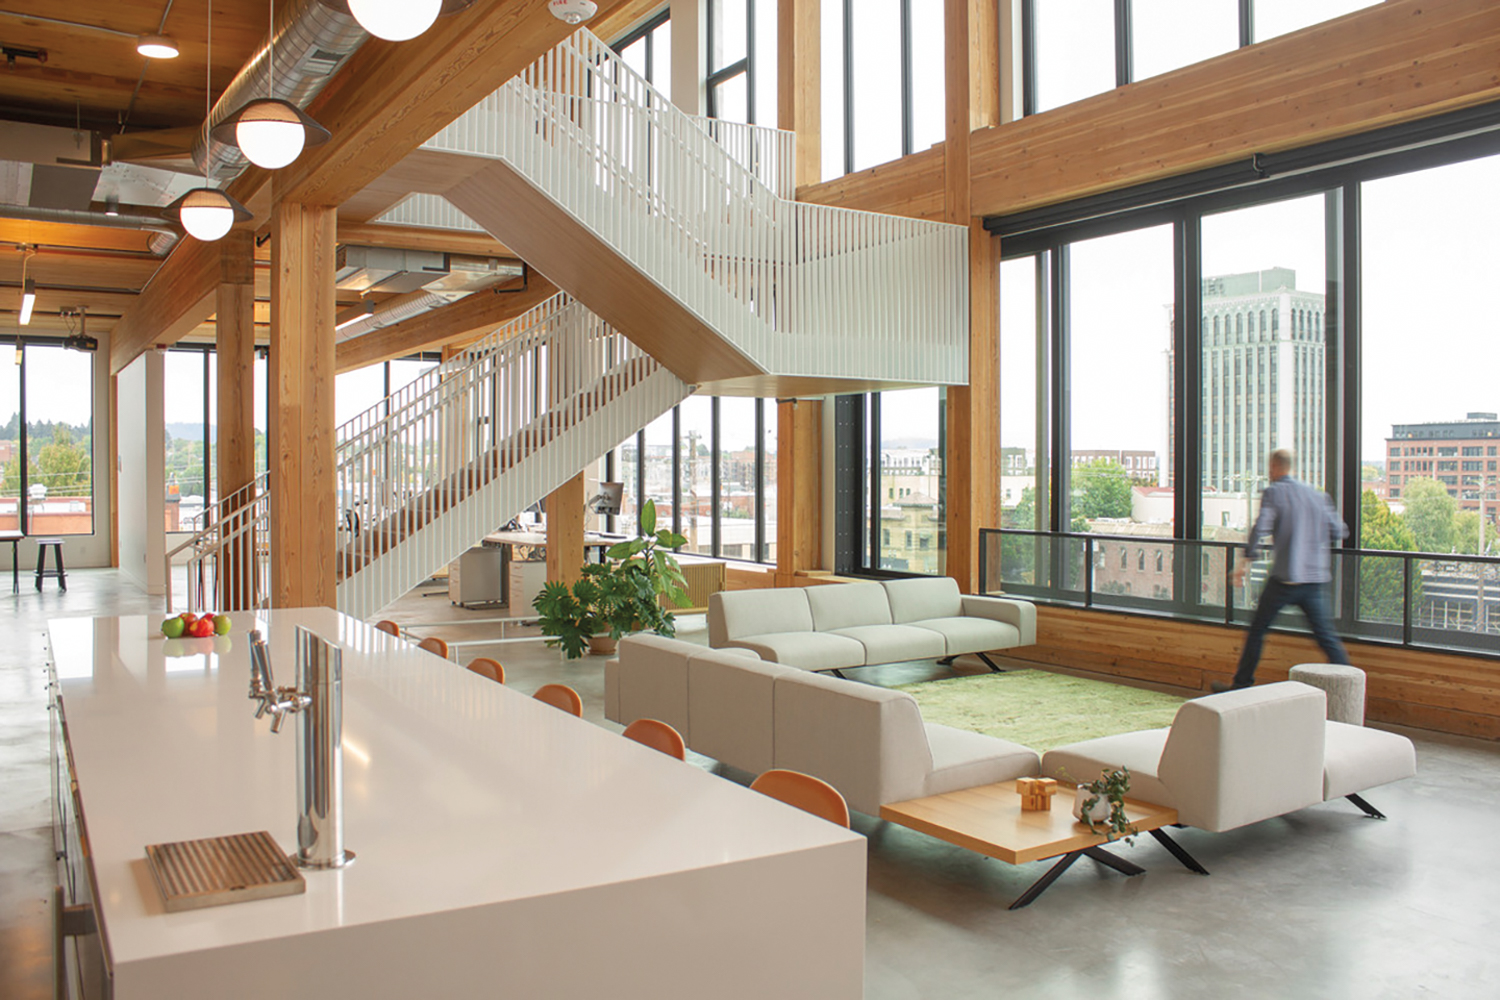 Double-height office space made of wood with white floating staircase and white sofas